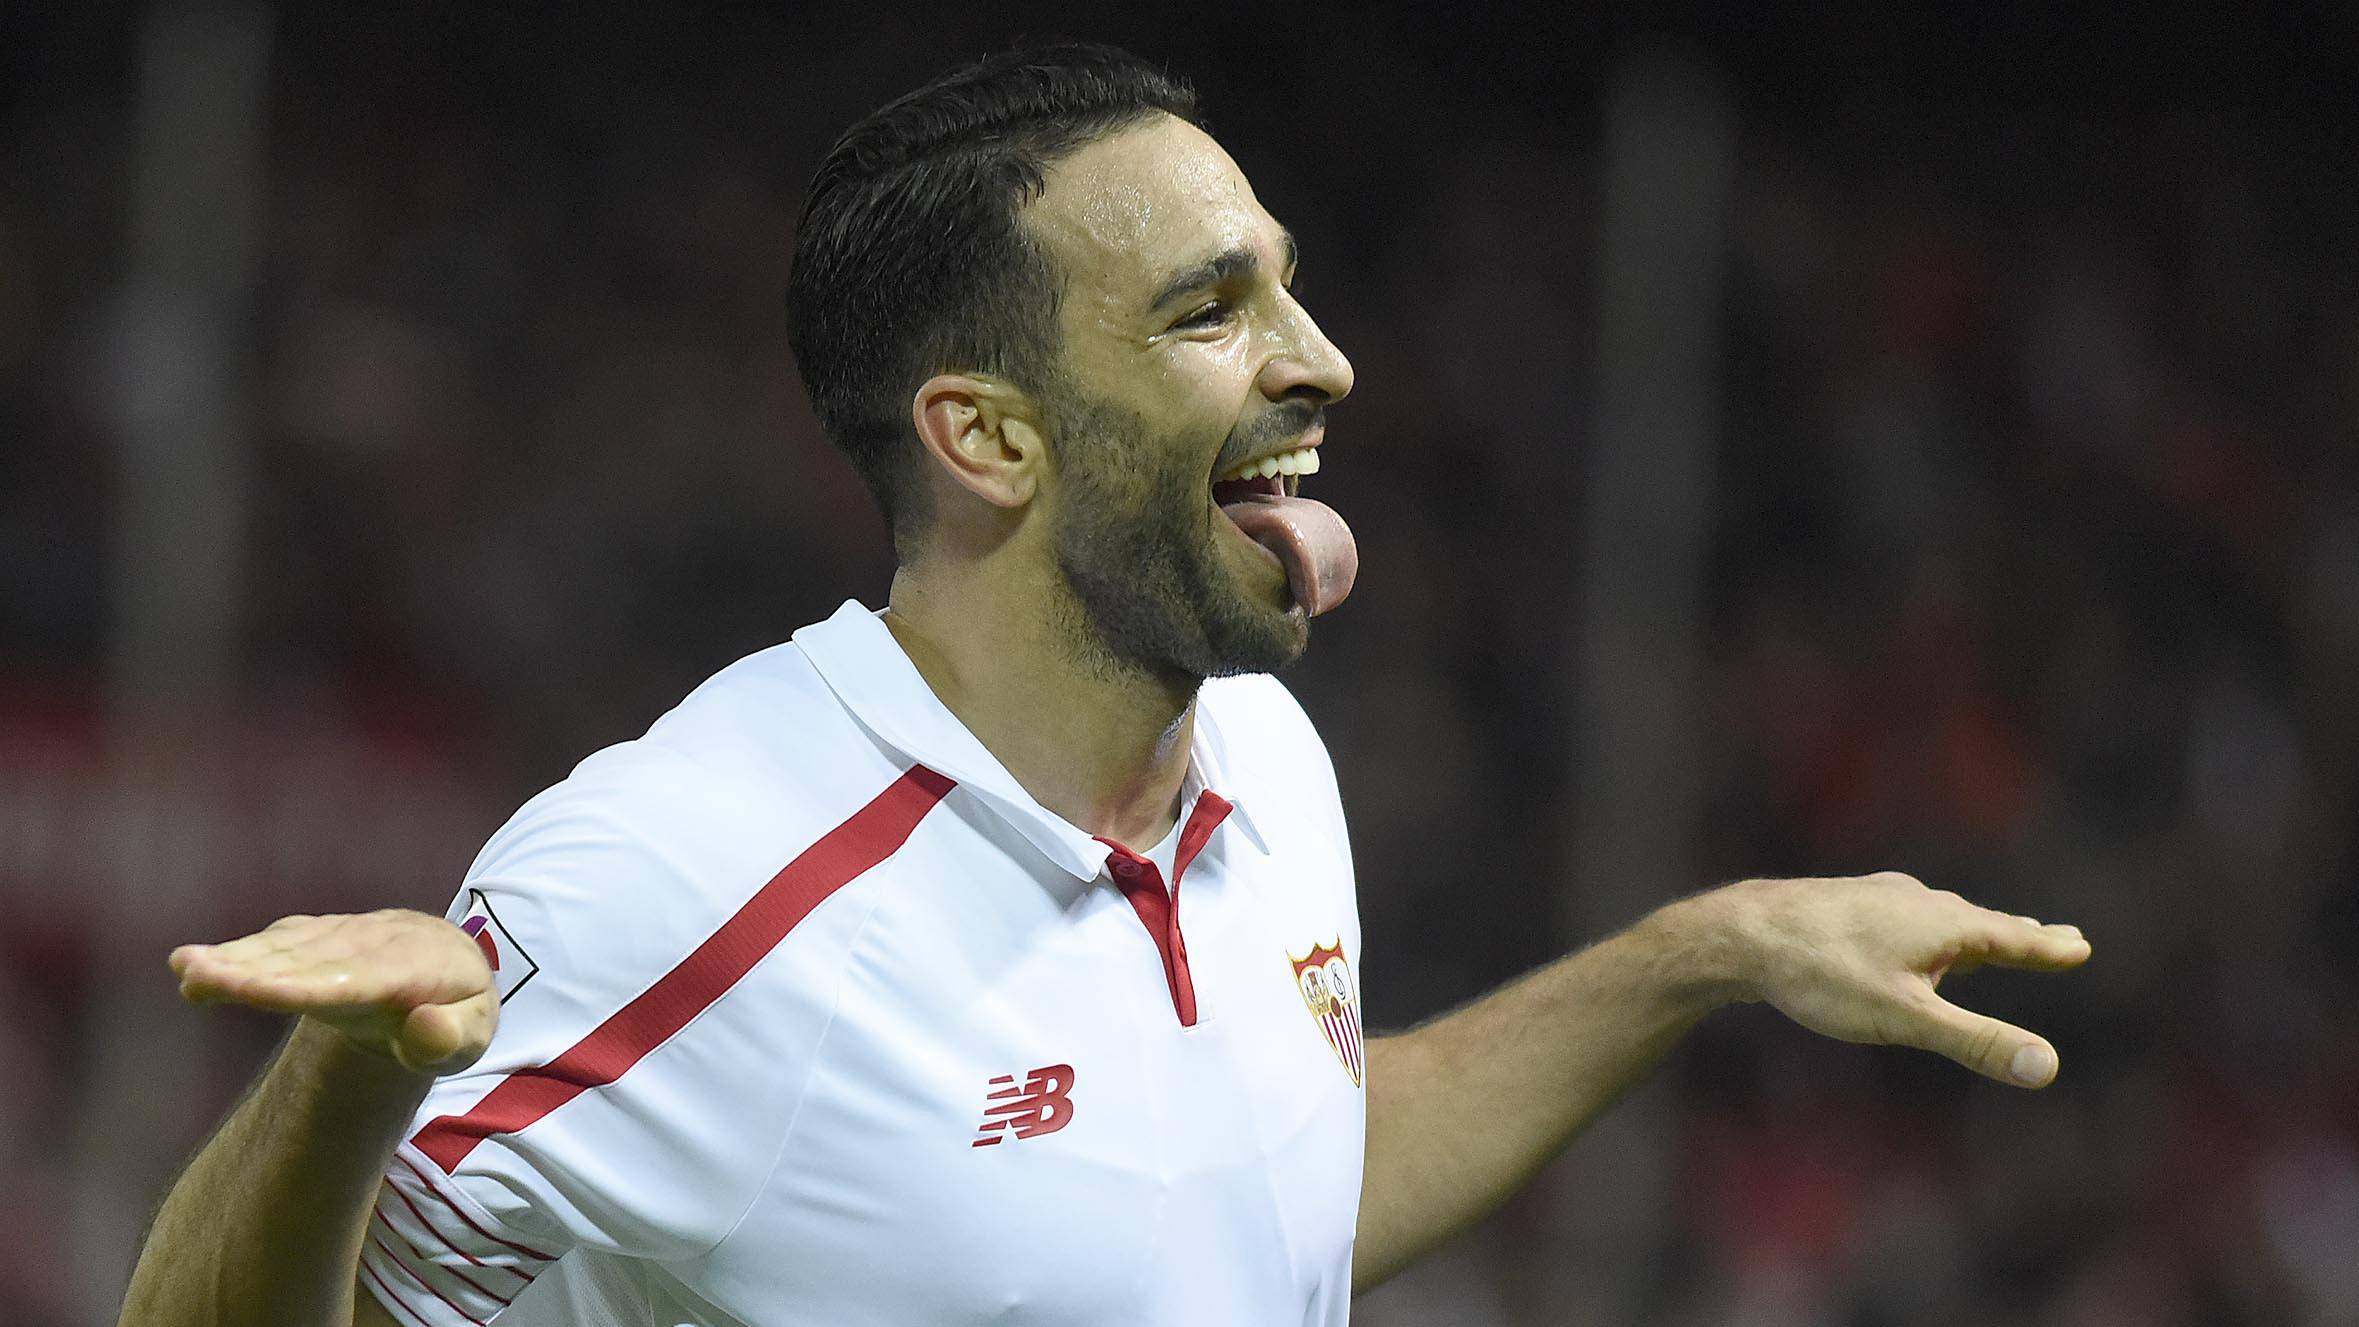 Adil Rami, celebrating a goal with the Seville